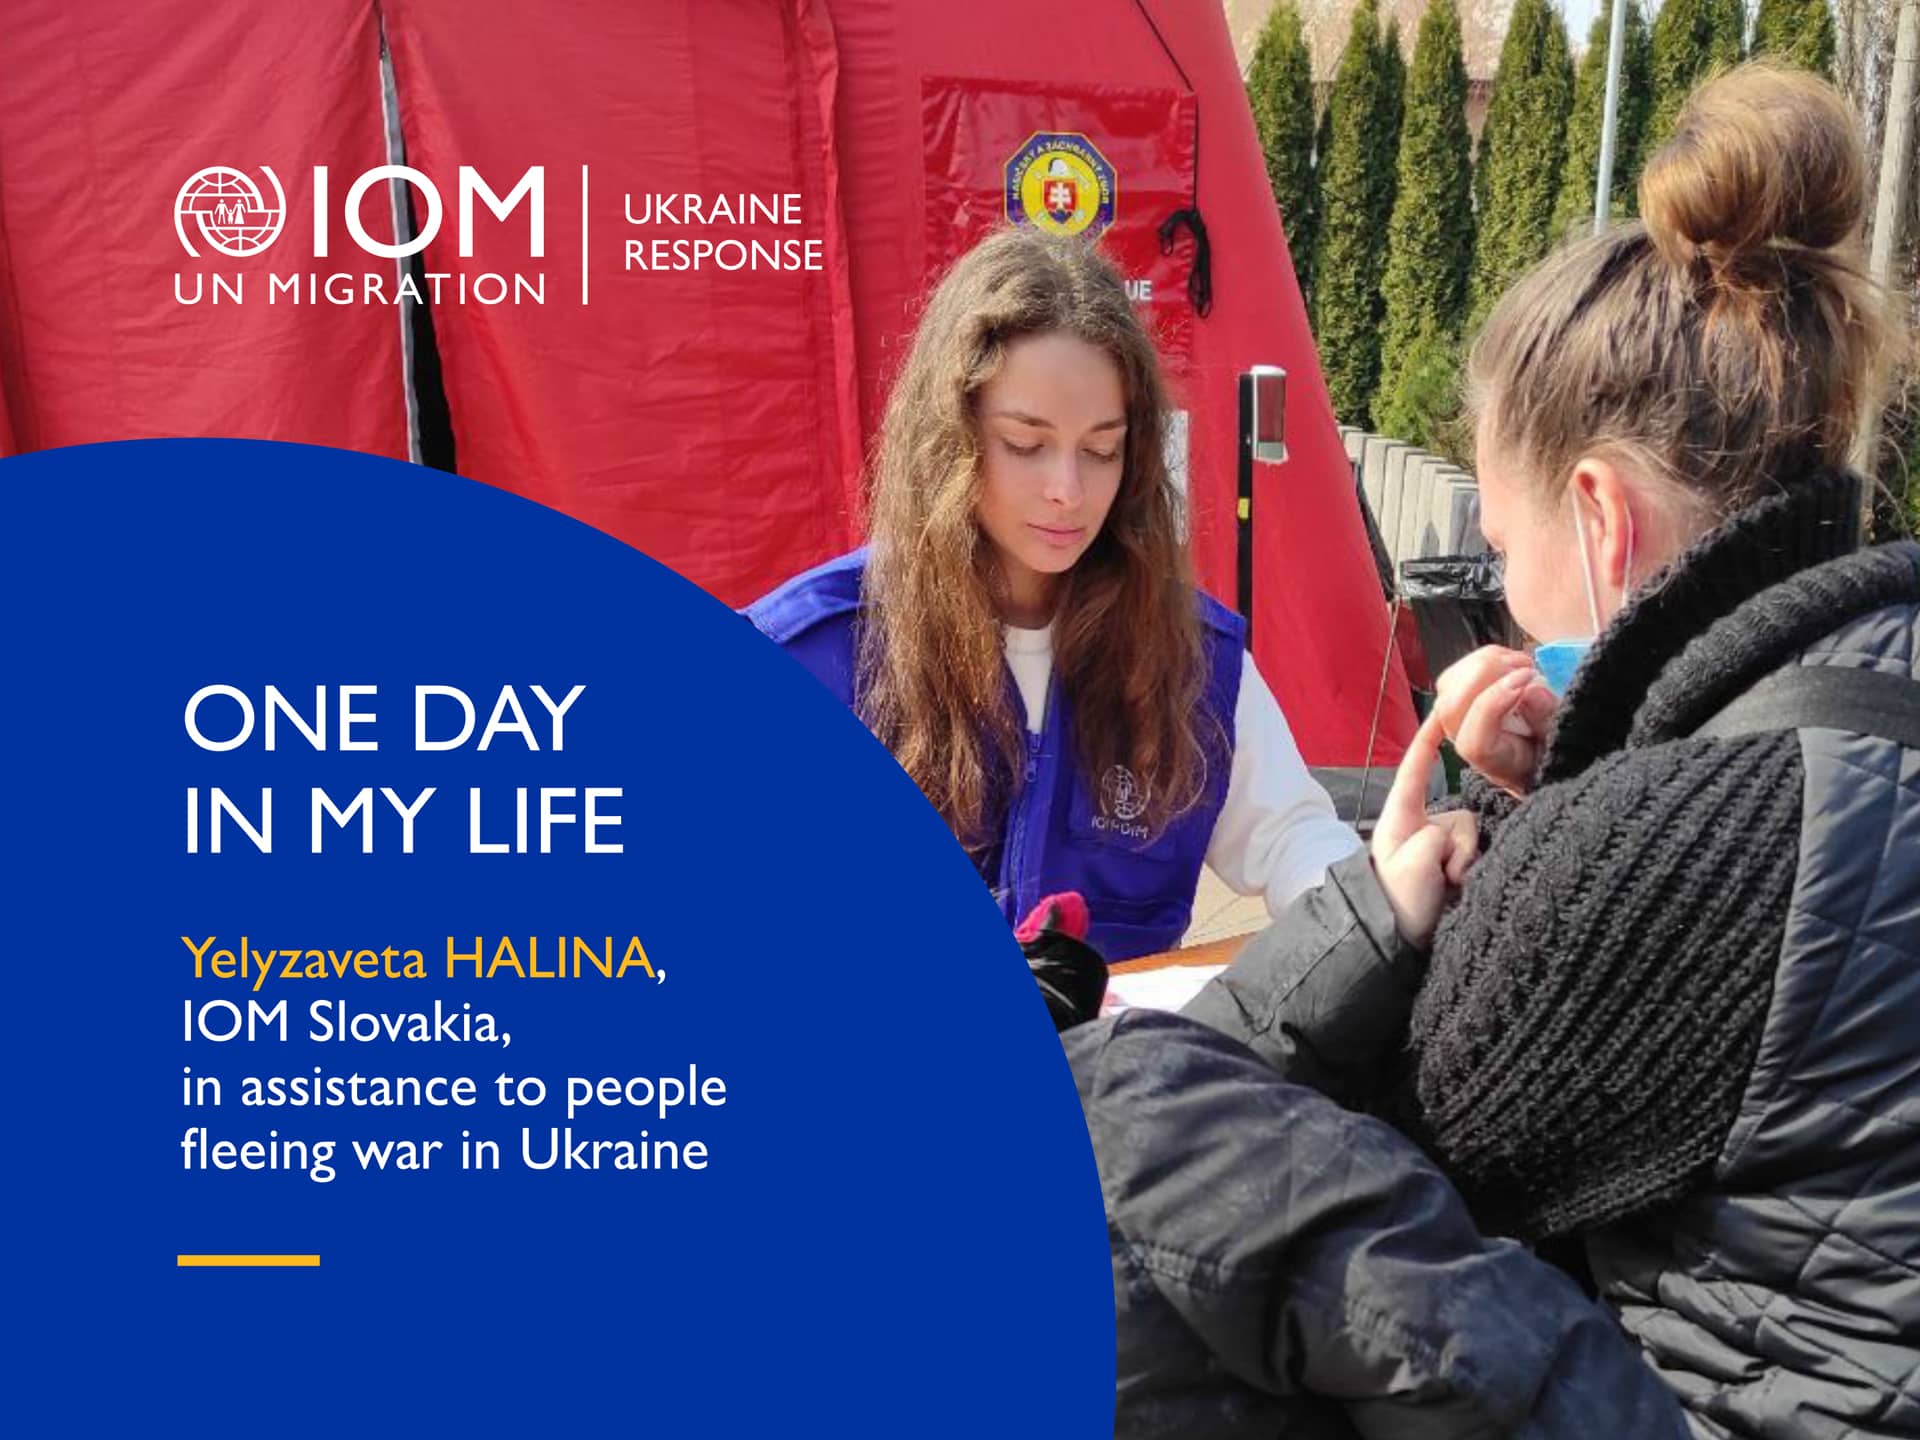 One day in my life in assistance to people fleeing war in Ukraine - Yelyzaveta Halina, IOM Slovakia